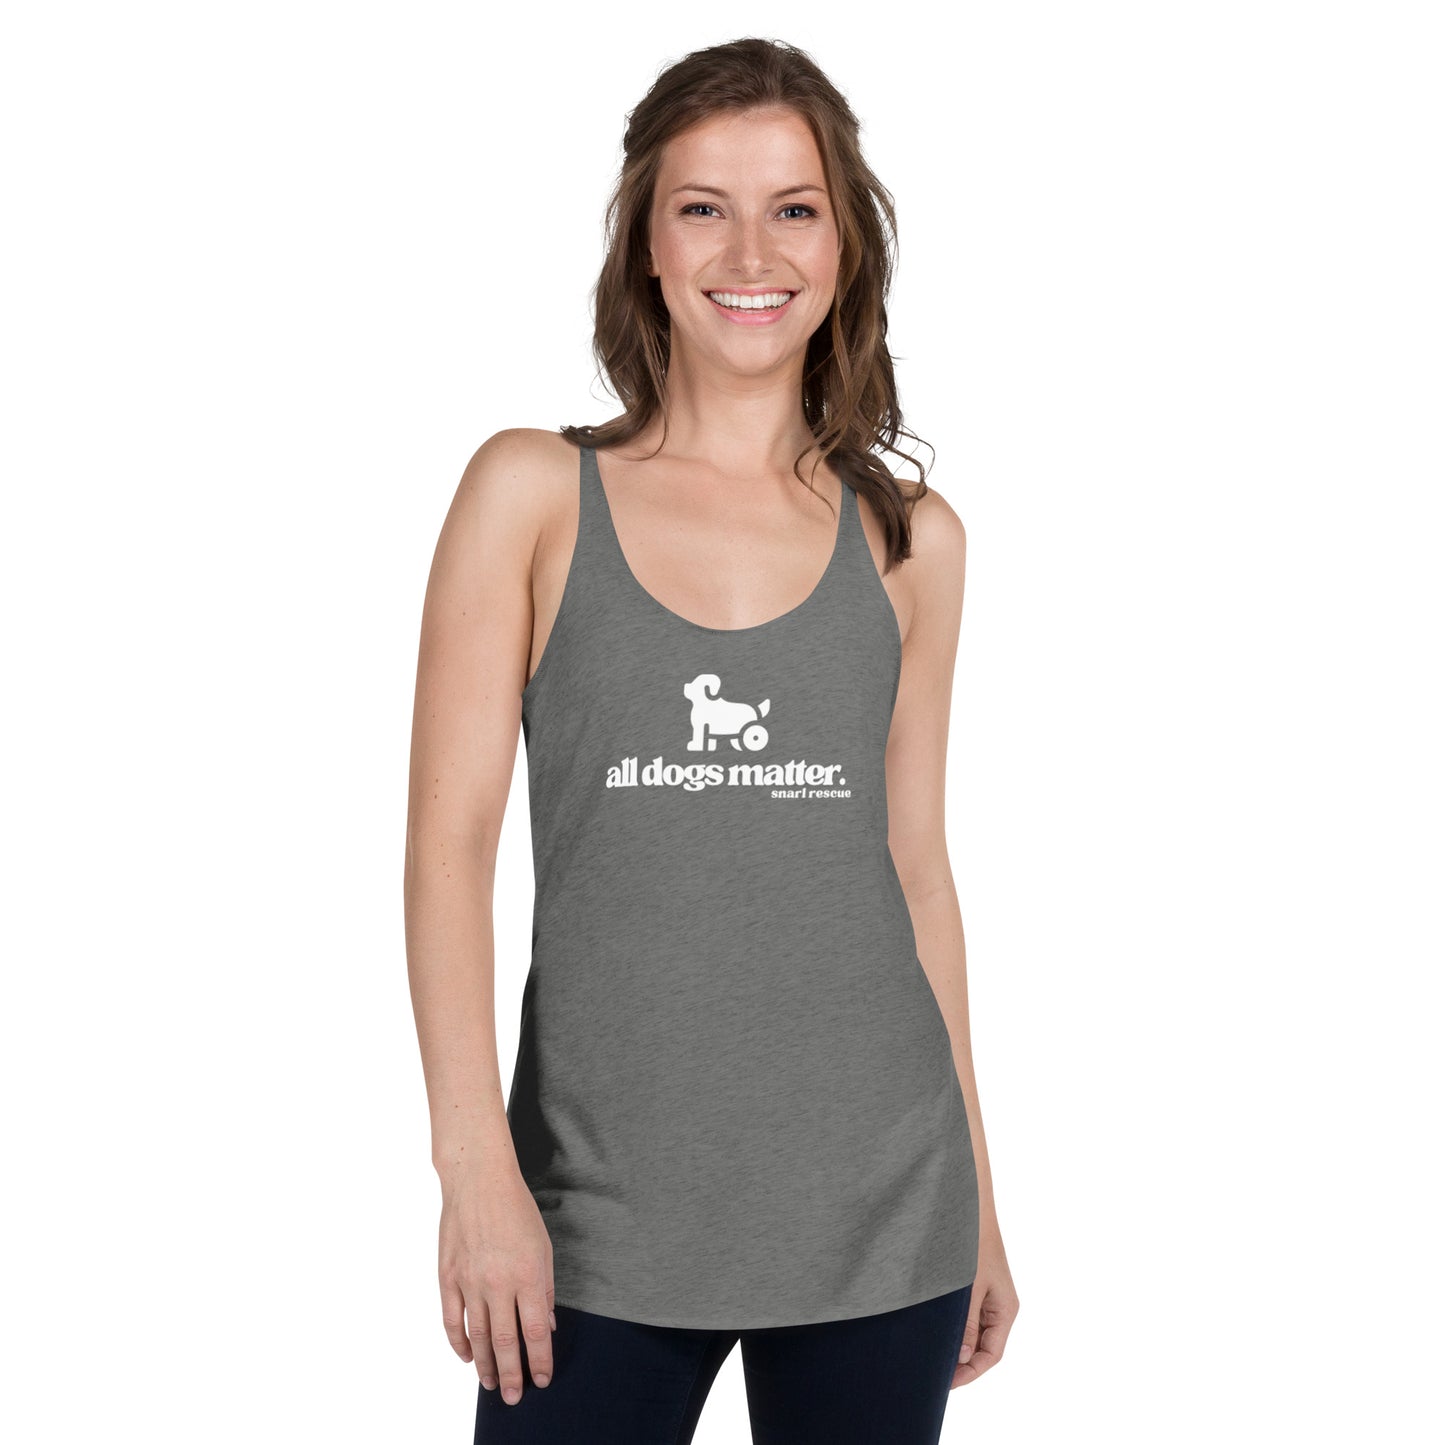 The All Dogs Matter Tank